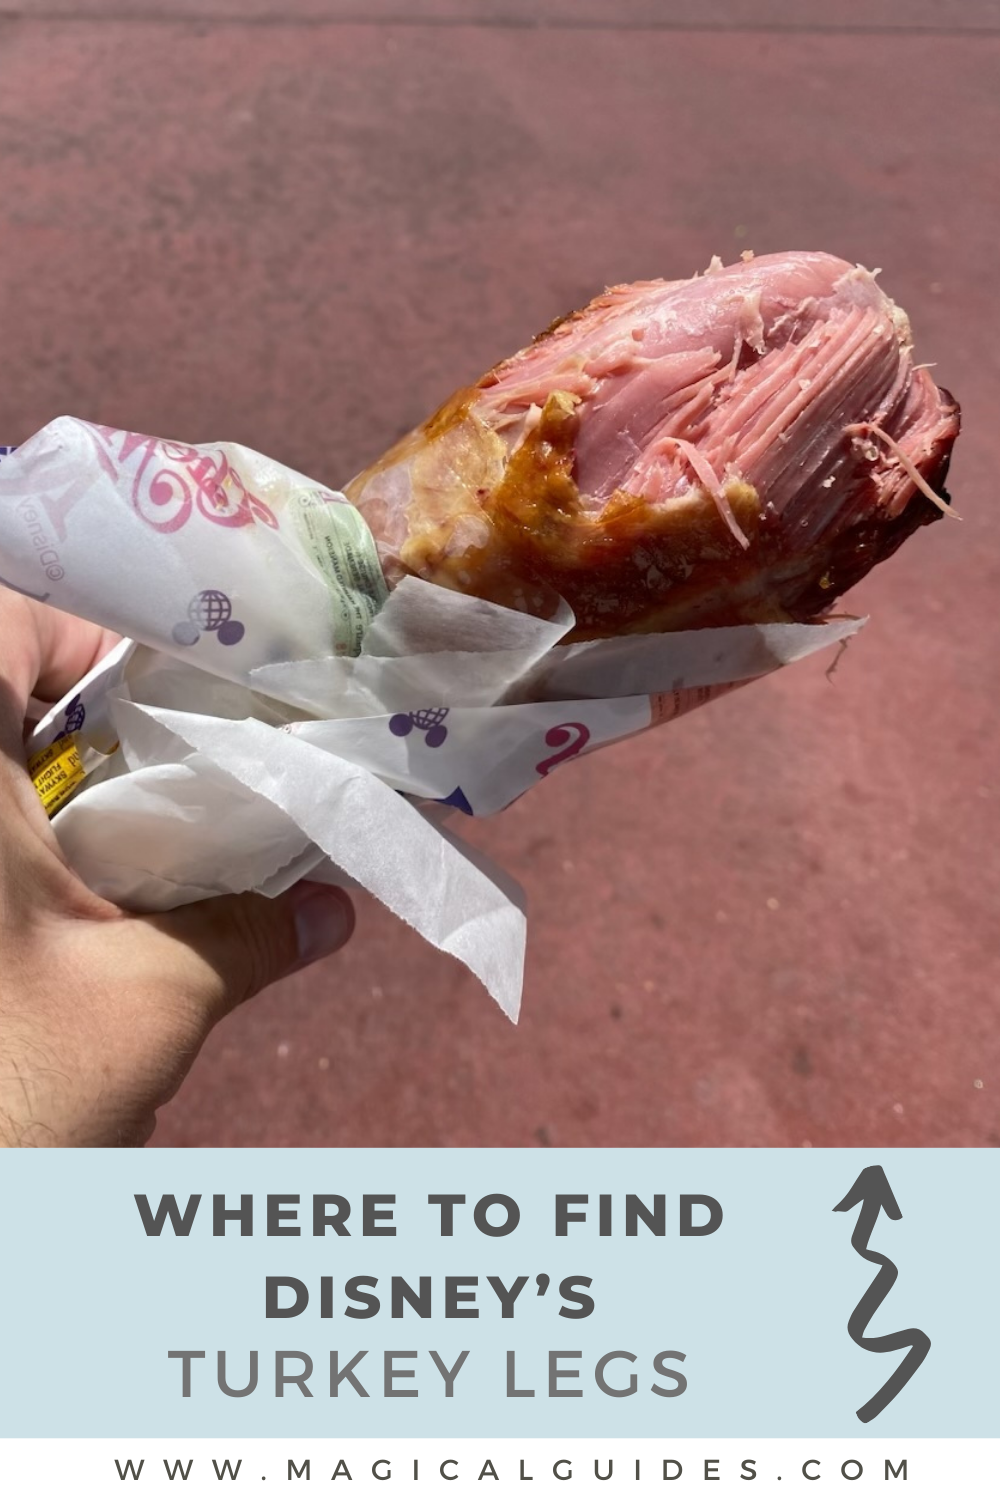 Everything you need to know about Disney's Turkey Legs.